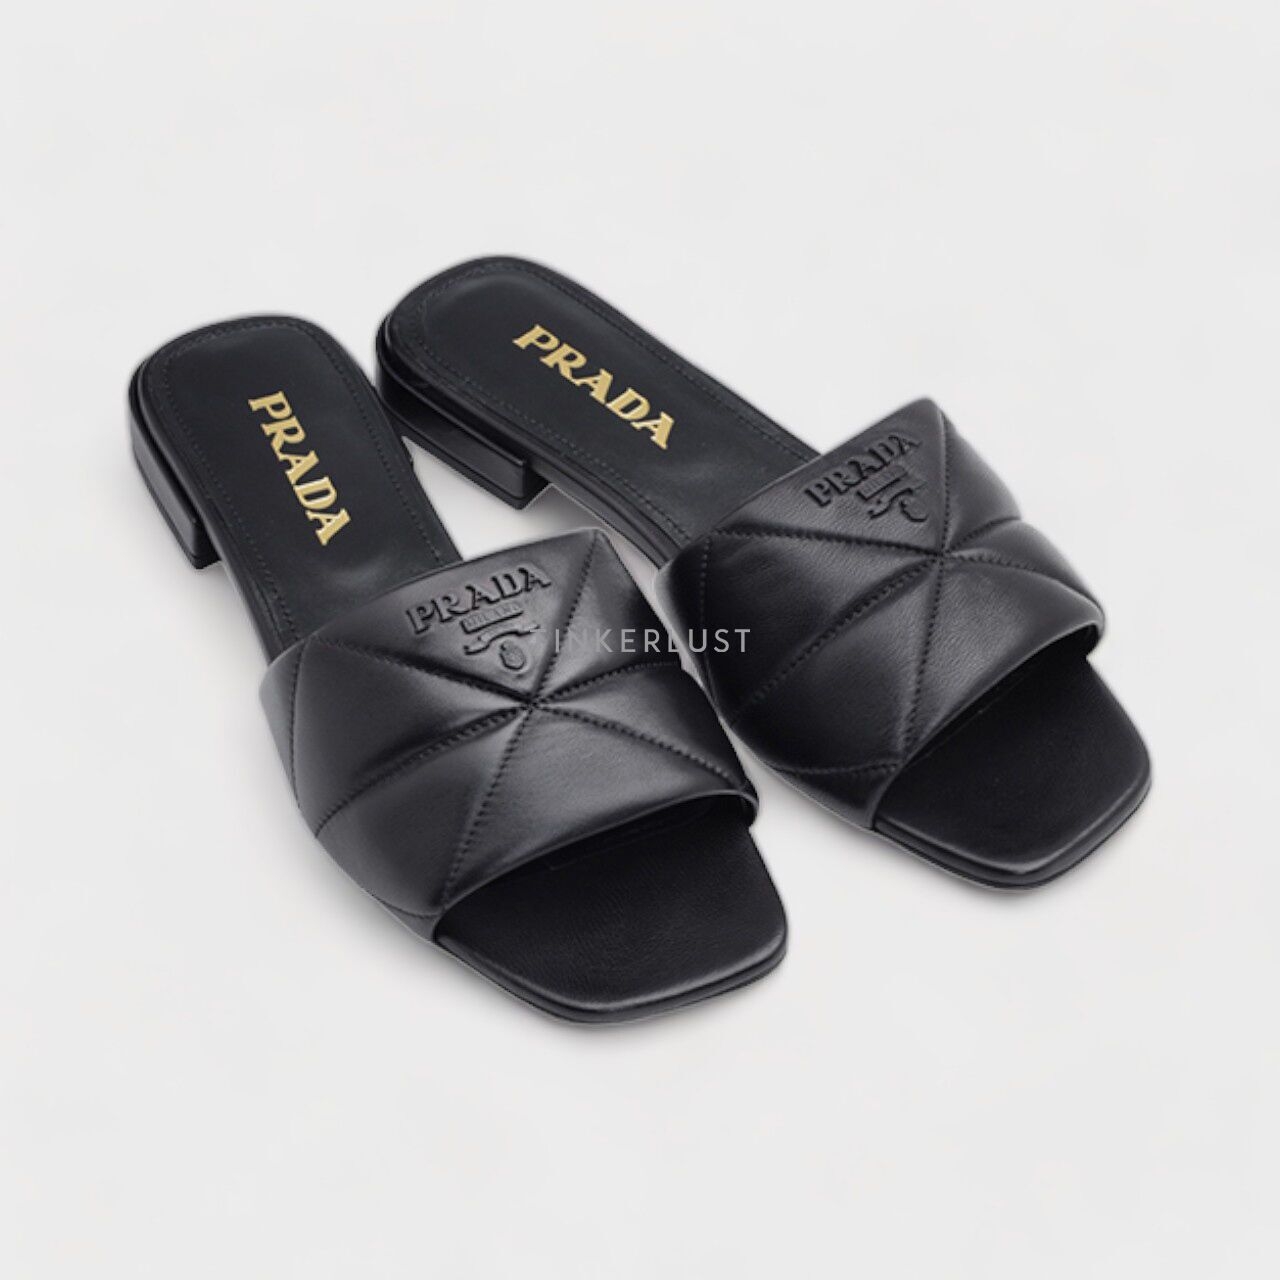 PRADA Women Logo Quilted Sandals in Black Nappa Leather